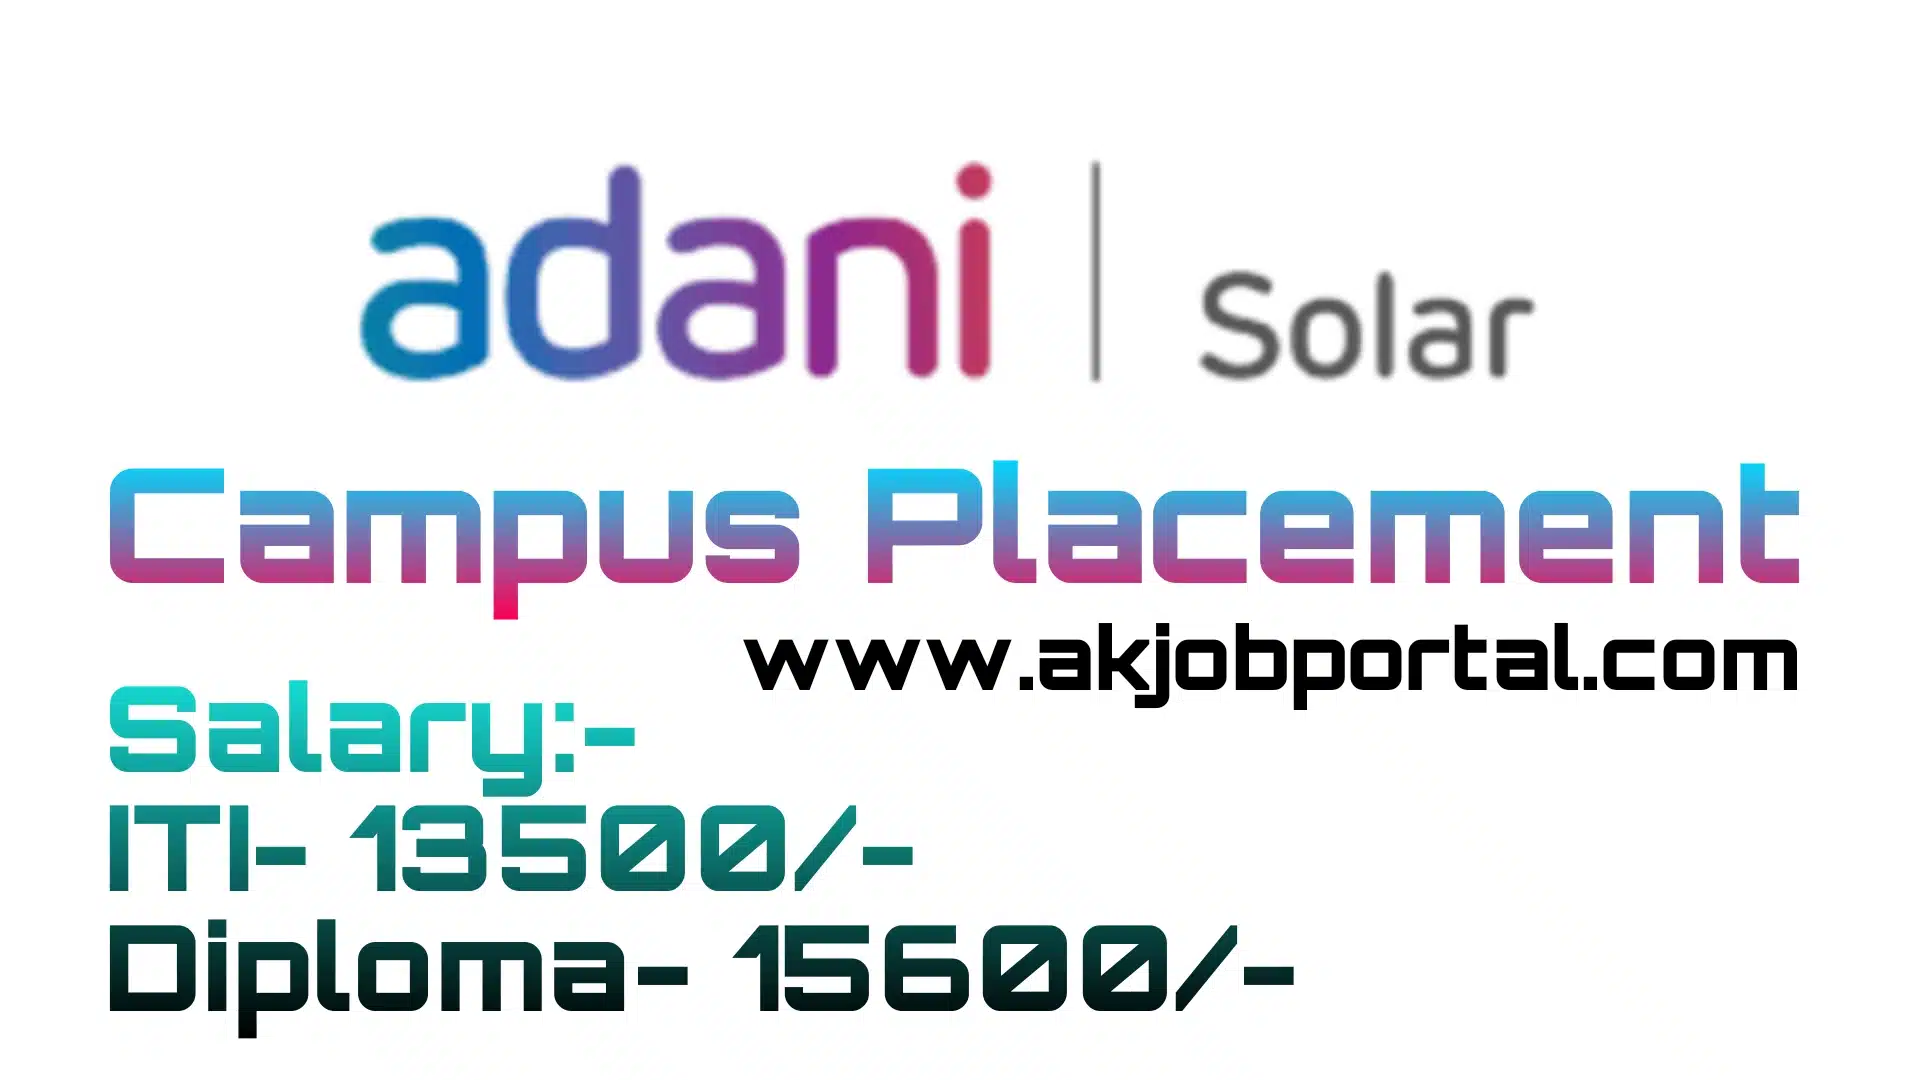 Adani Solar Panel in Ahmedabad at best price by Adani Solar (Corporate  Headquarters) - Justdial